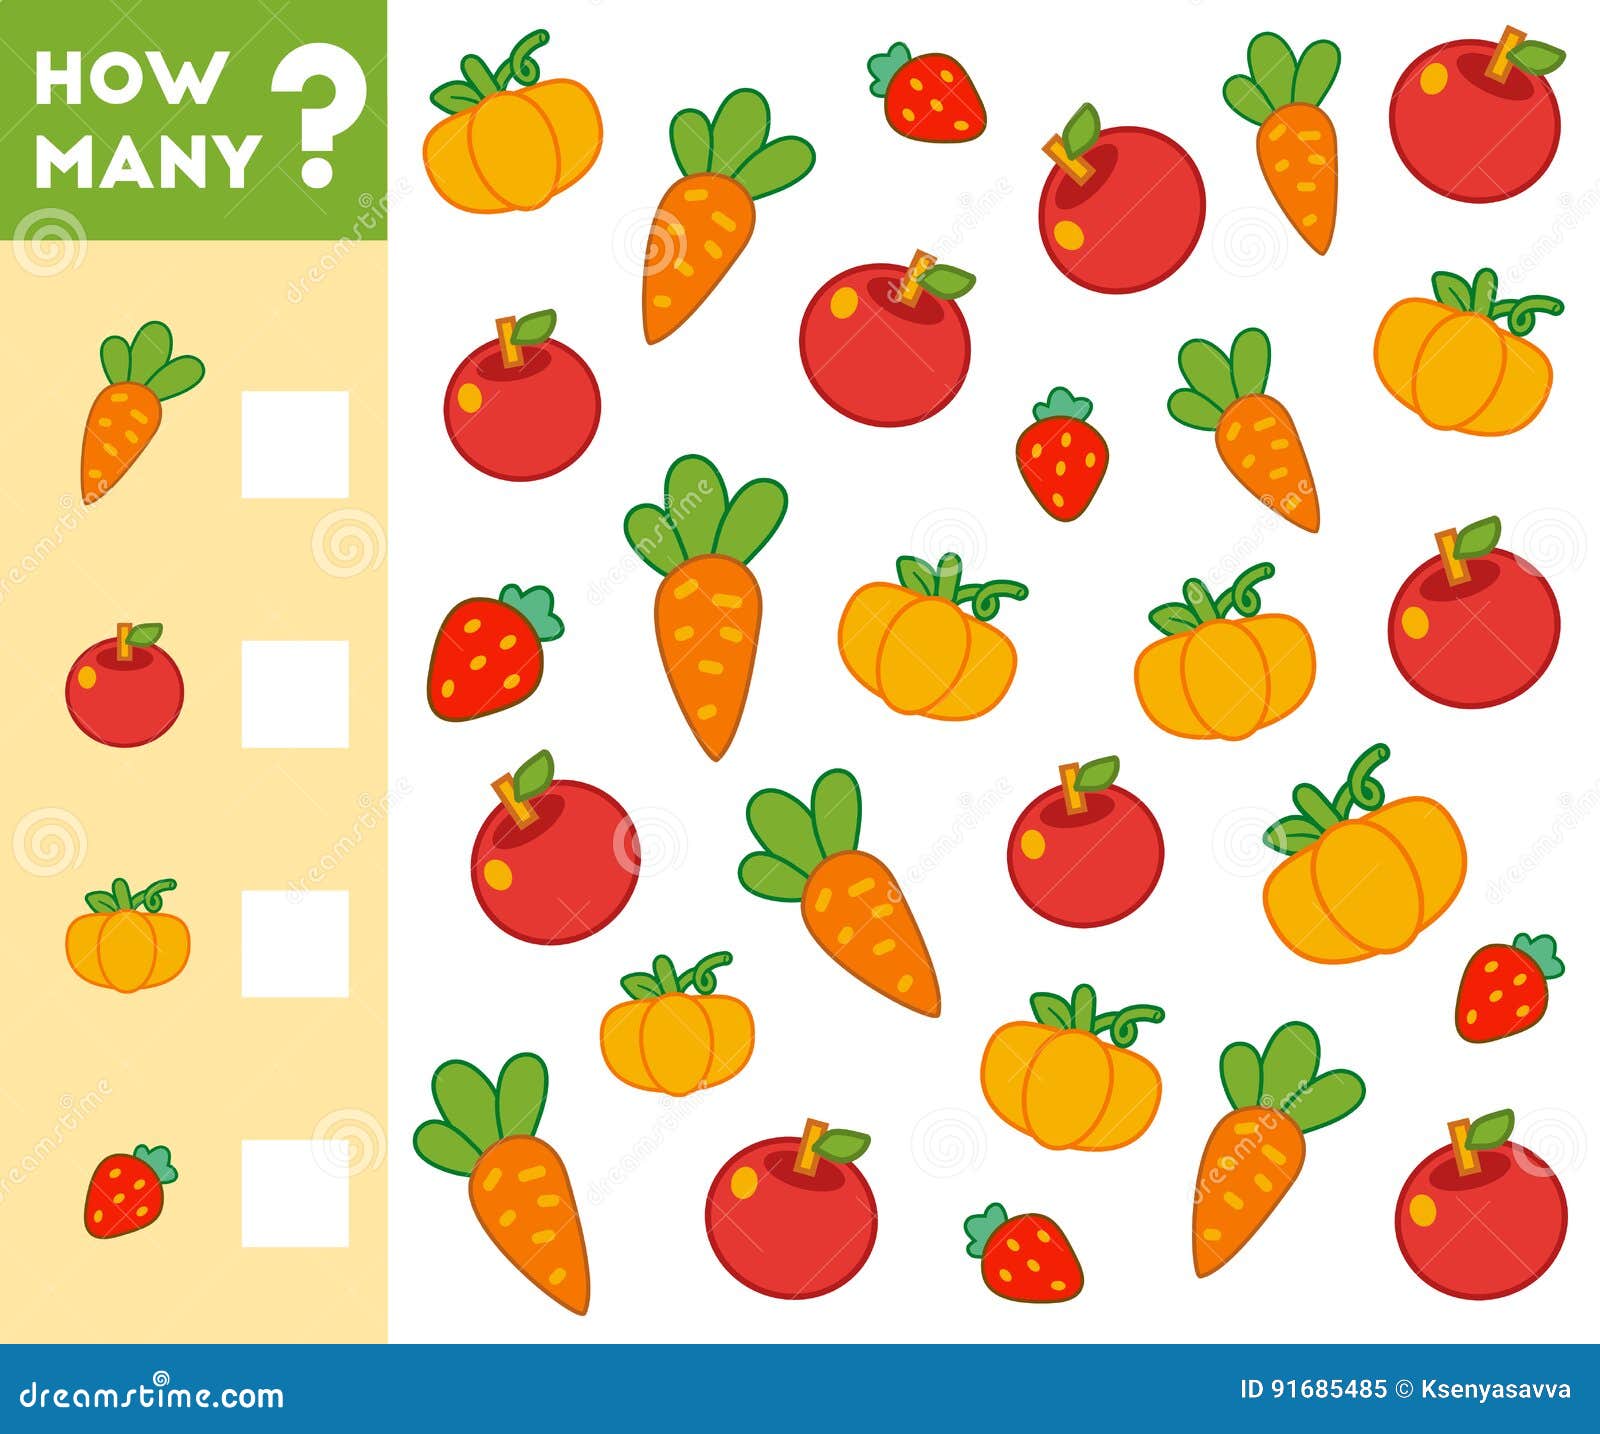 counting game for children. count how many fruits, vegetables